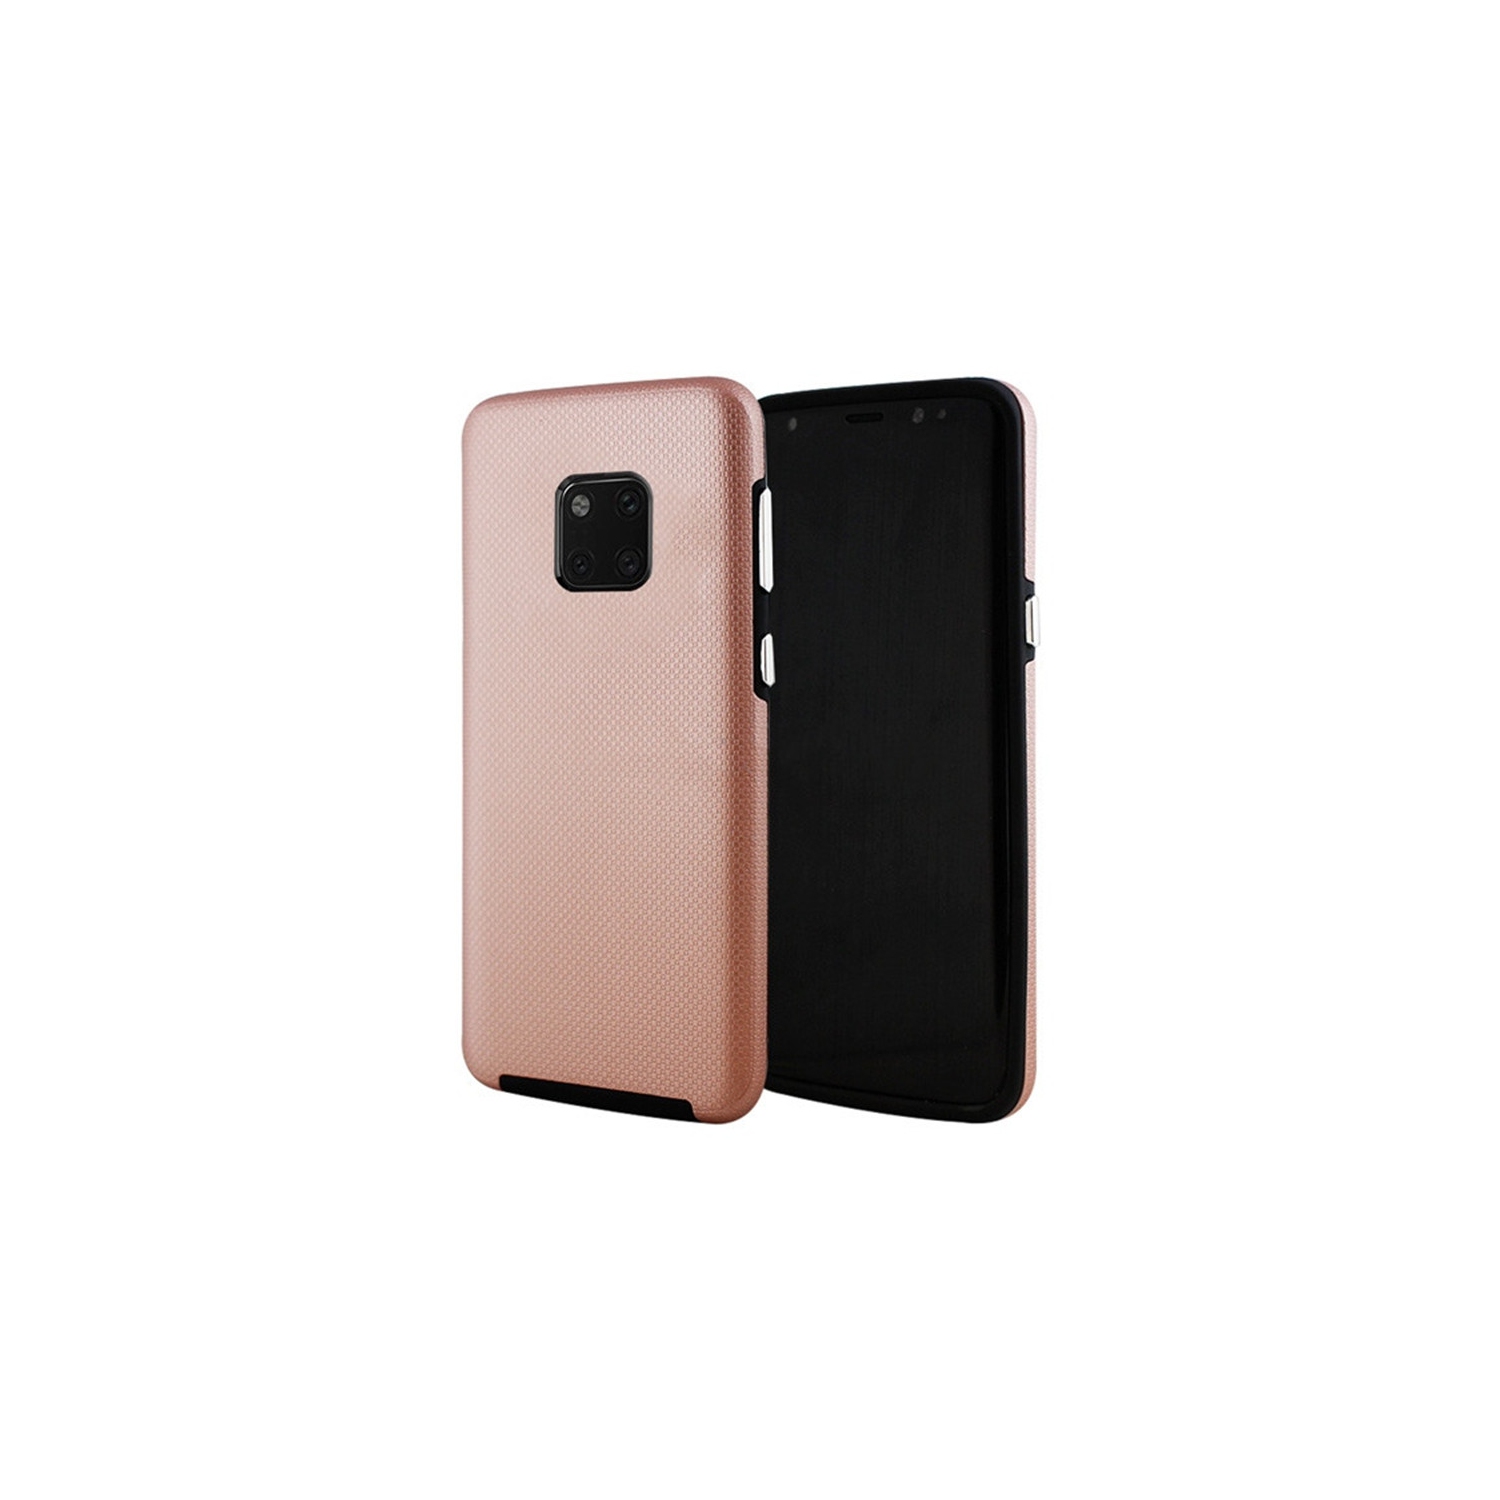 【CSmart】 Slim Fitted Hybrid Hard PC Shell Shockproof Scratch Resistant Case Cover for Huawei Mate 20 Pro, Rose Gold